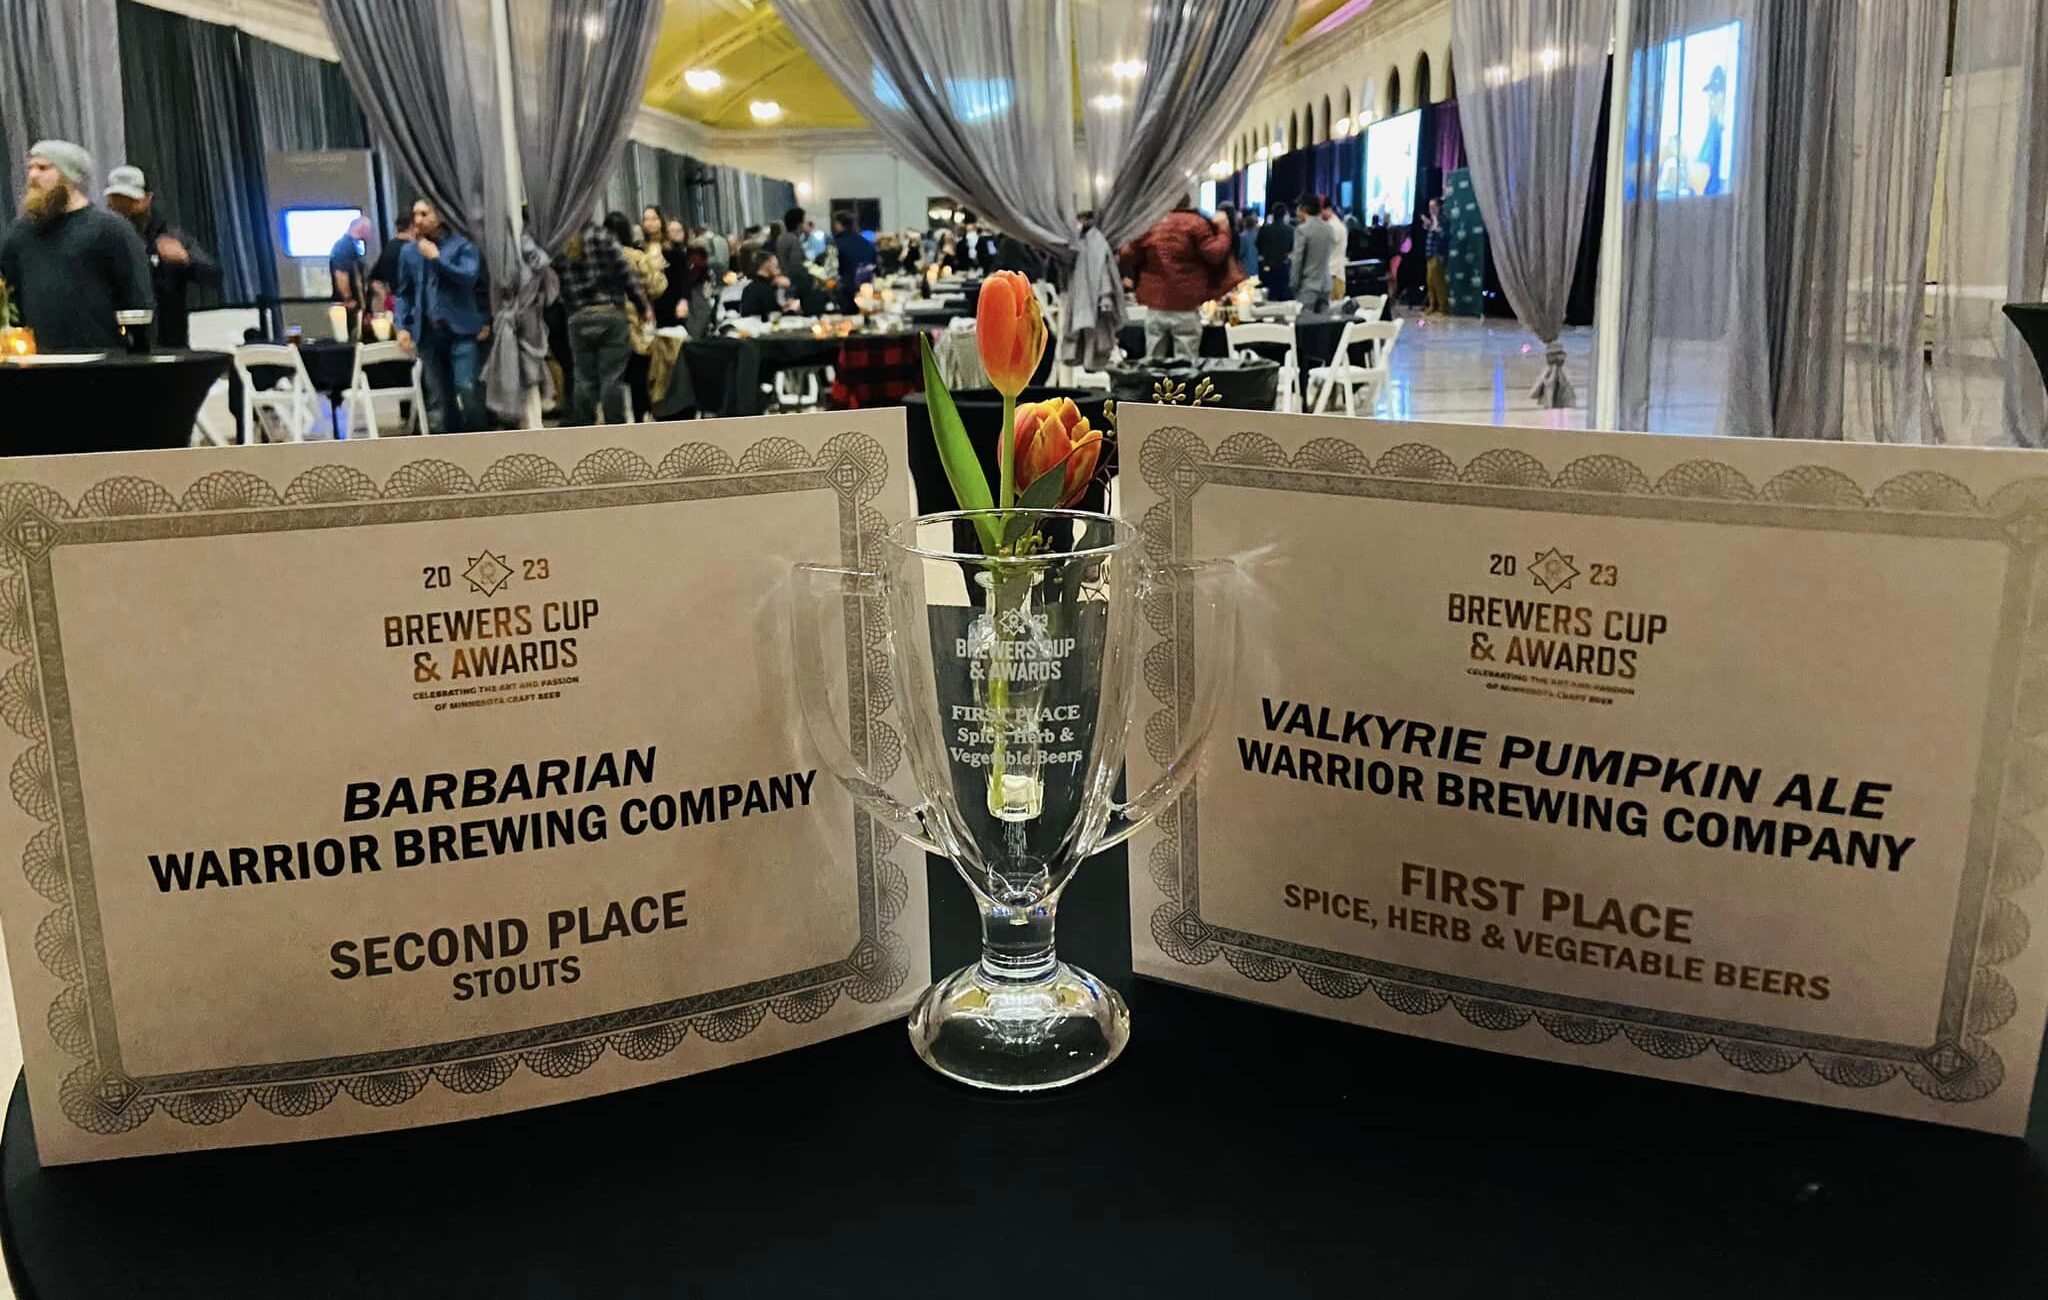 Warrior Brewing's two awards